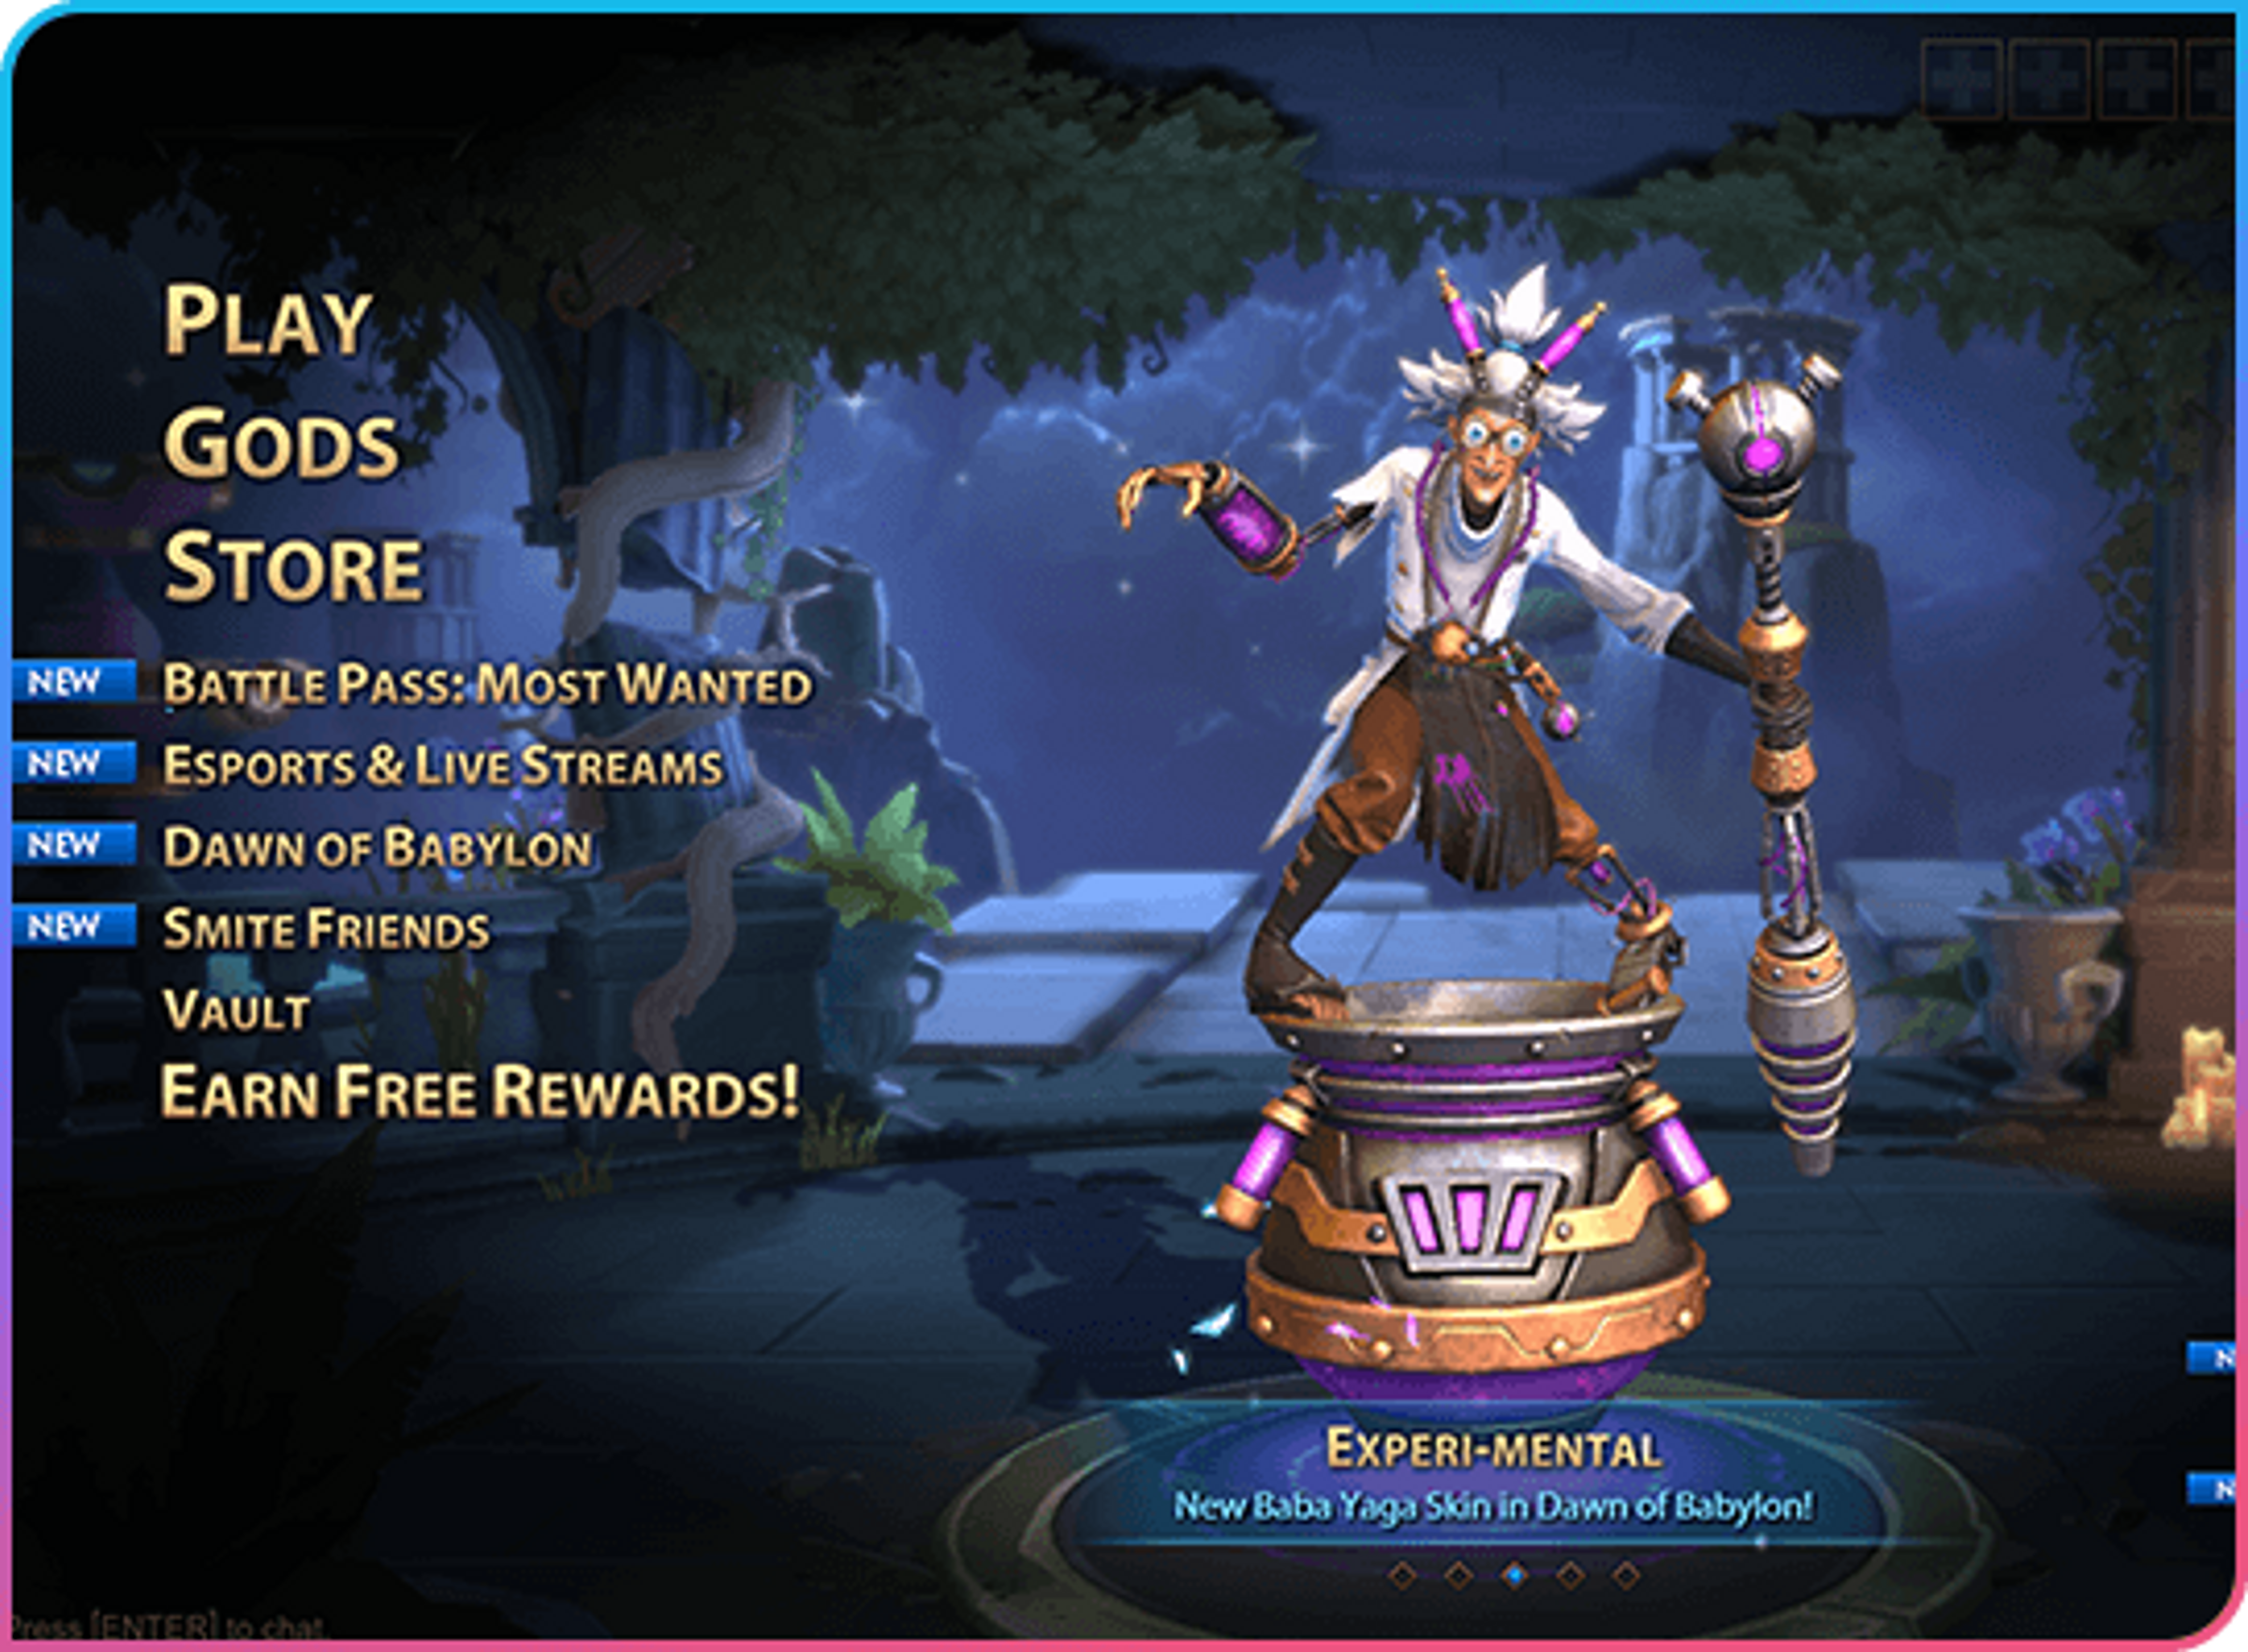 Screenshot of the PlayerWON video game advertising experience that showcases a user on main menu before selecting to earn free rewards.